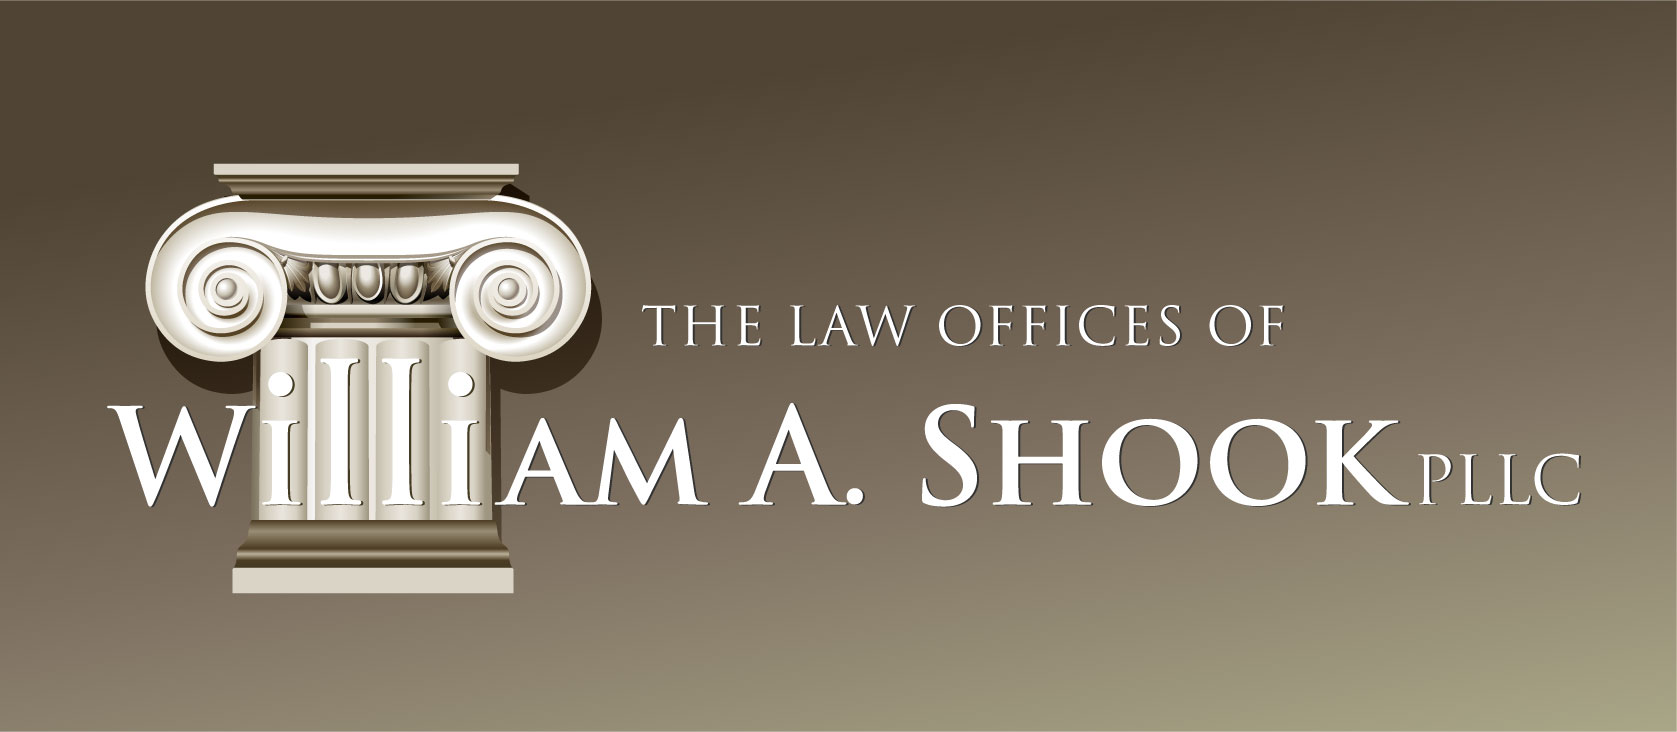 The Law Offices of William A. Shook PLLC